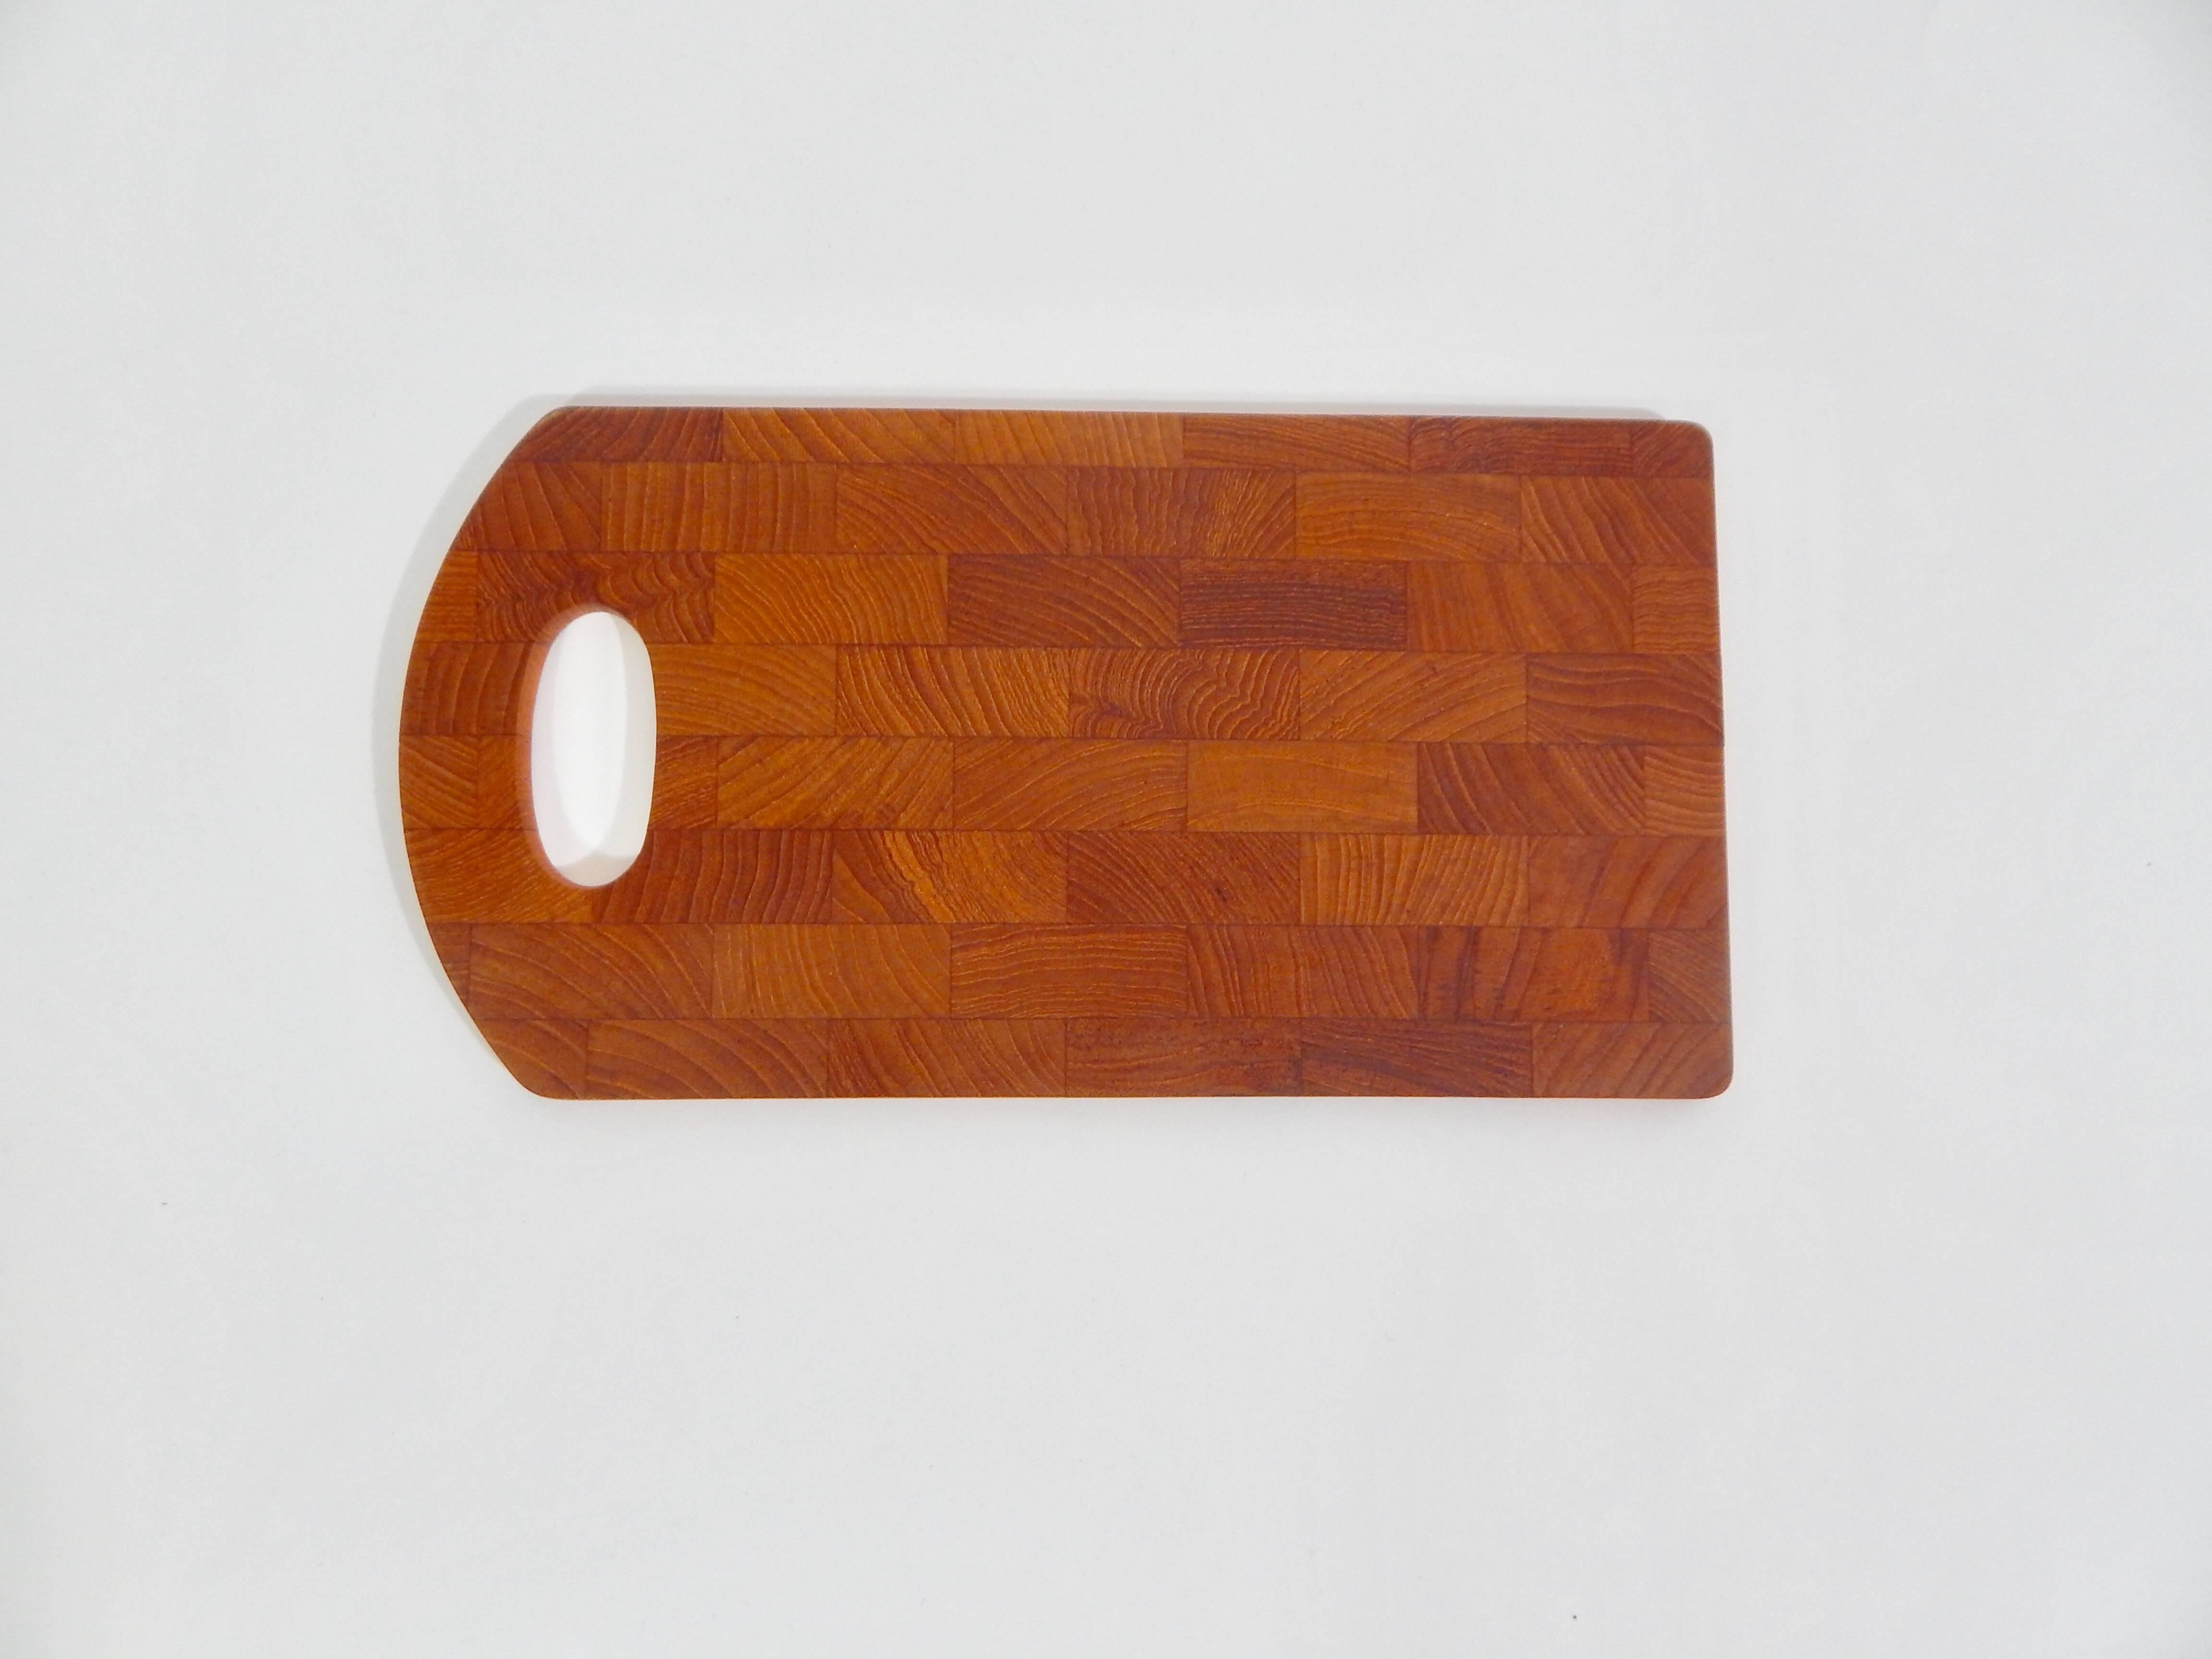 Midcentury 1960s Danish teak tray designed by Jens Quistgaard for Dansk.
Excellent Condition 
Domestic Shipping is Complimentary Free for this Item